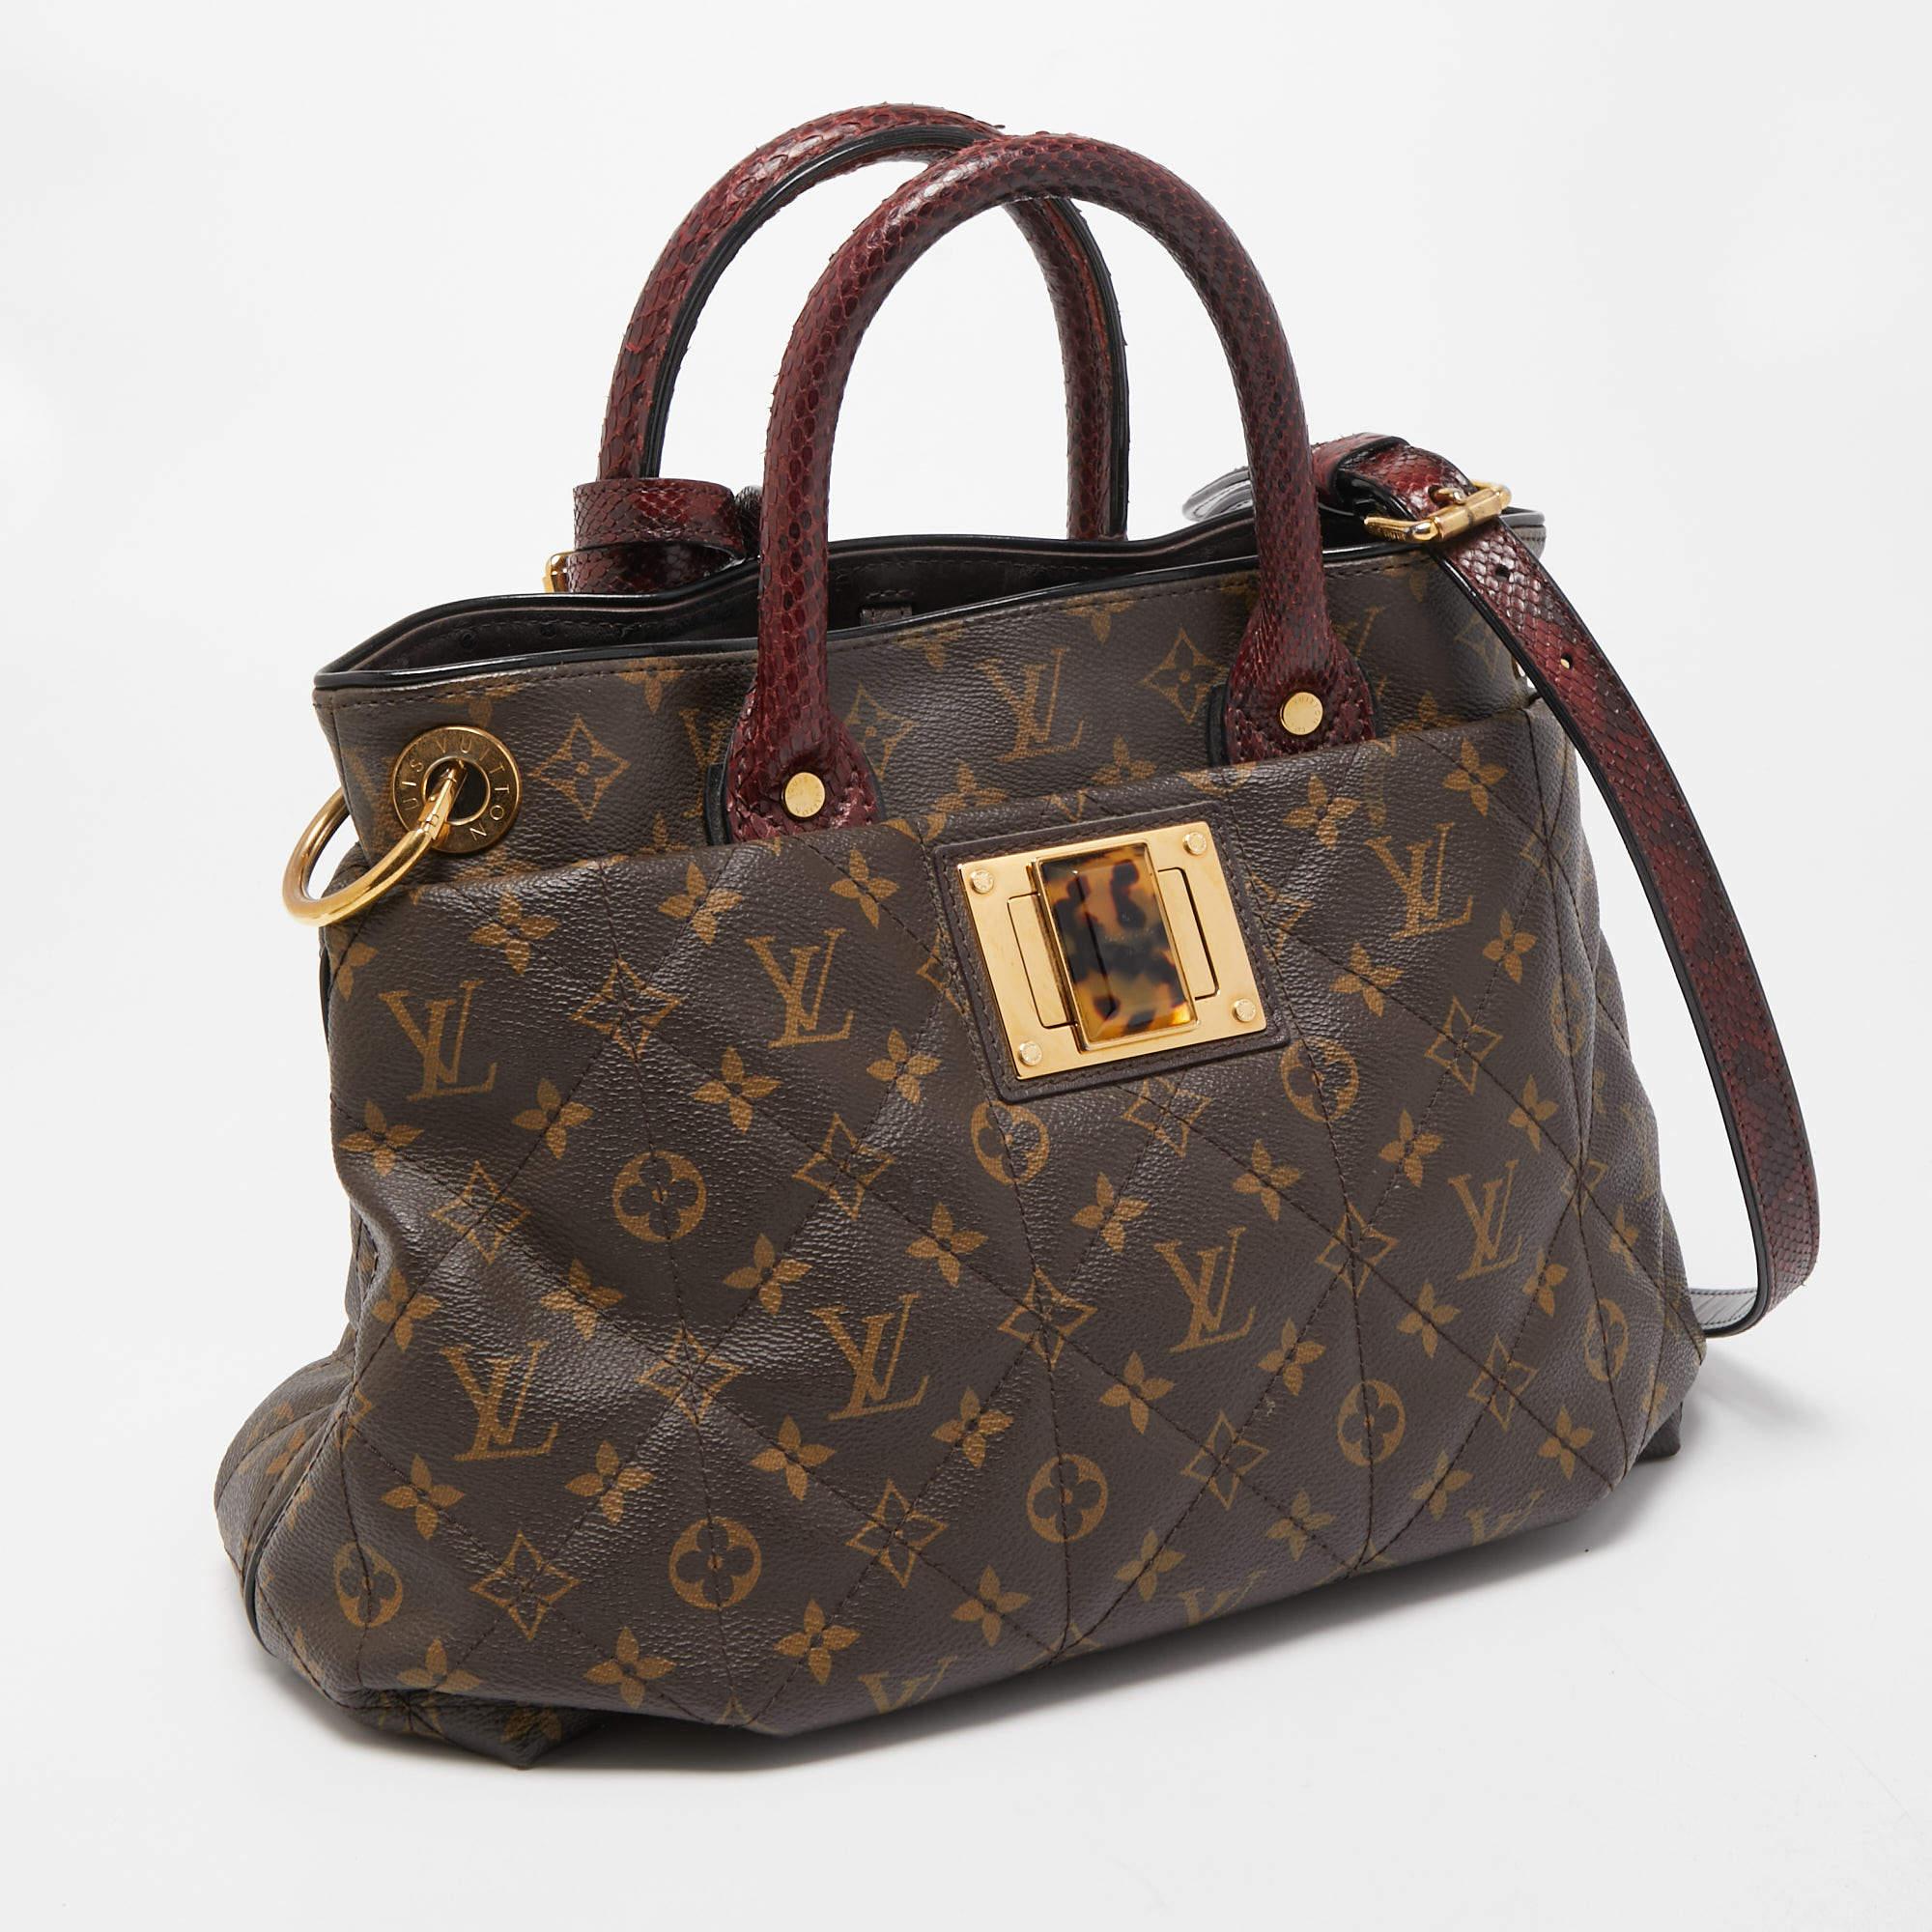 The luxurious and rare edition of the Etoile Exotique MM Bag from Louis Vuitton is crafted in the signature LV Monogram canvas. The tote comes equipped with python top handles and a shoulder strap that can be removed. Gold-tone hardware lends it a